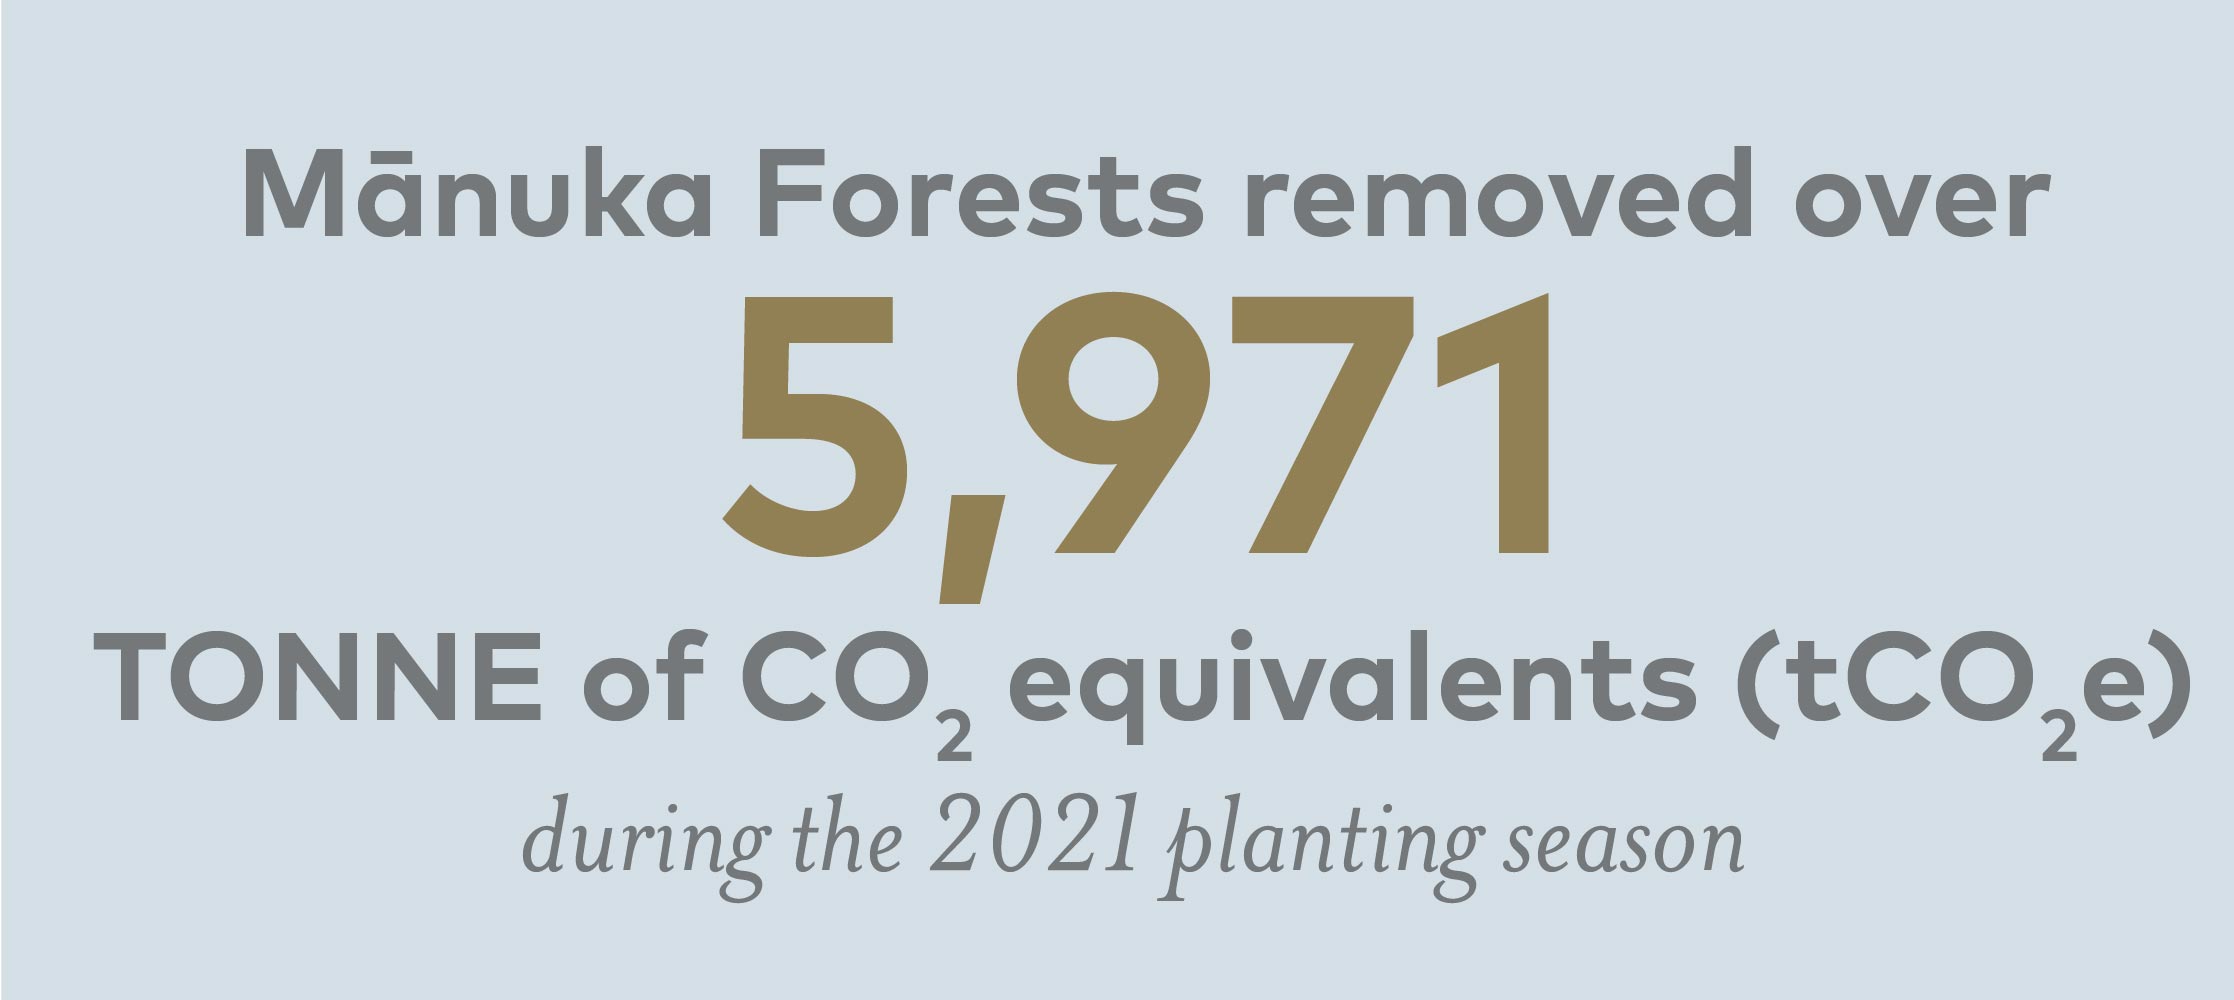 Mānuka Forests removed over5,971 TONNE of CO2 equivalents (tCO2e) during the 2021 planting season 